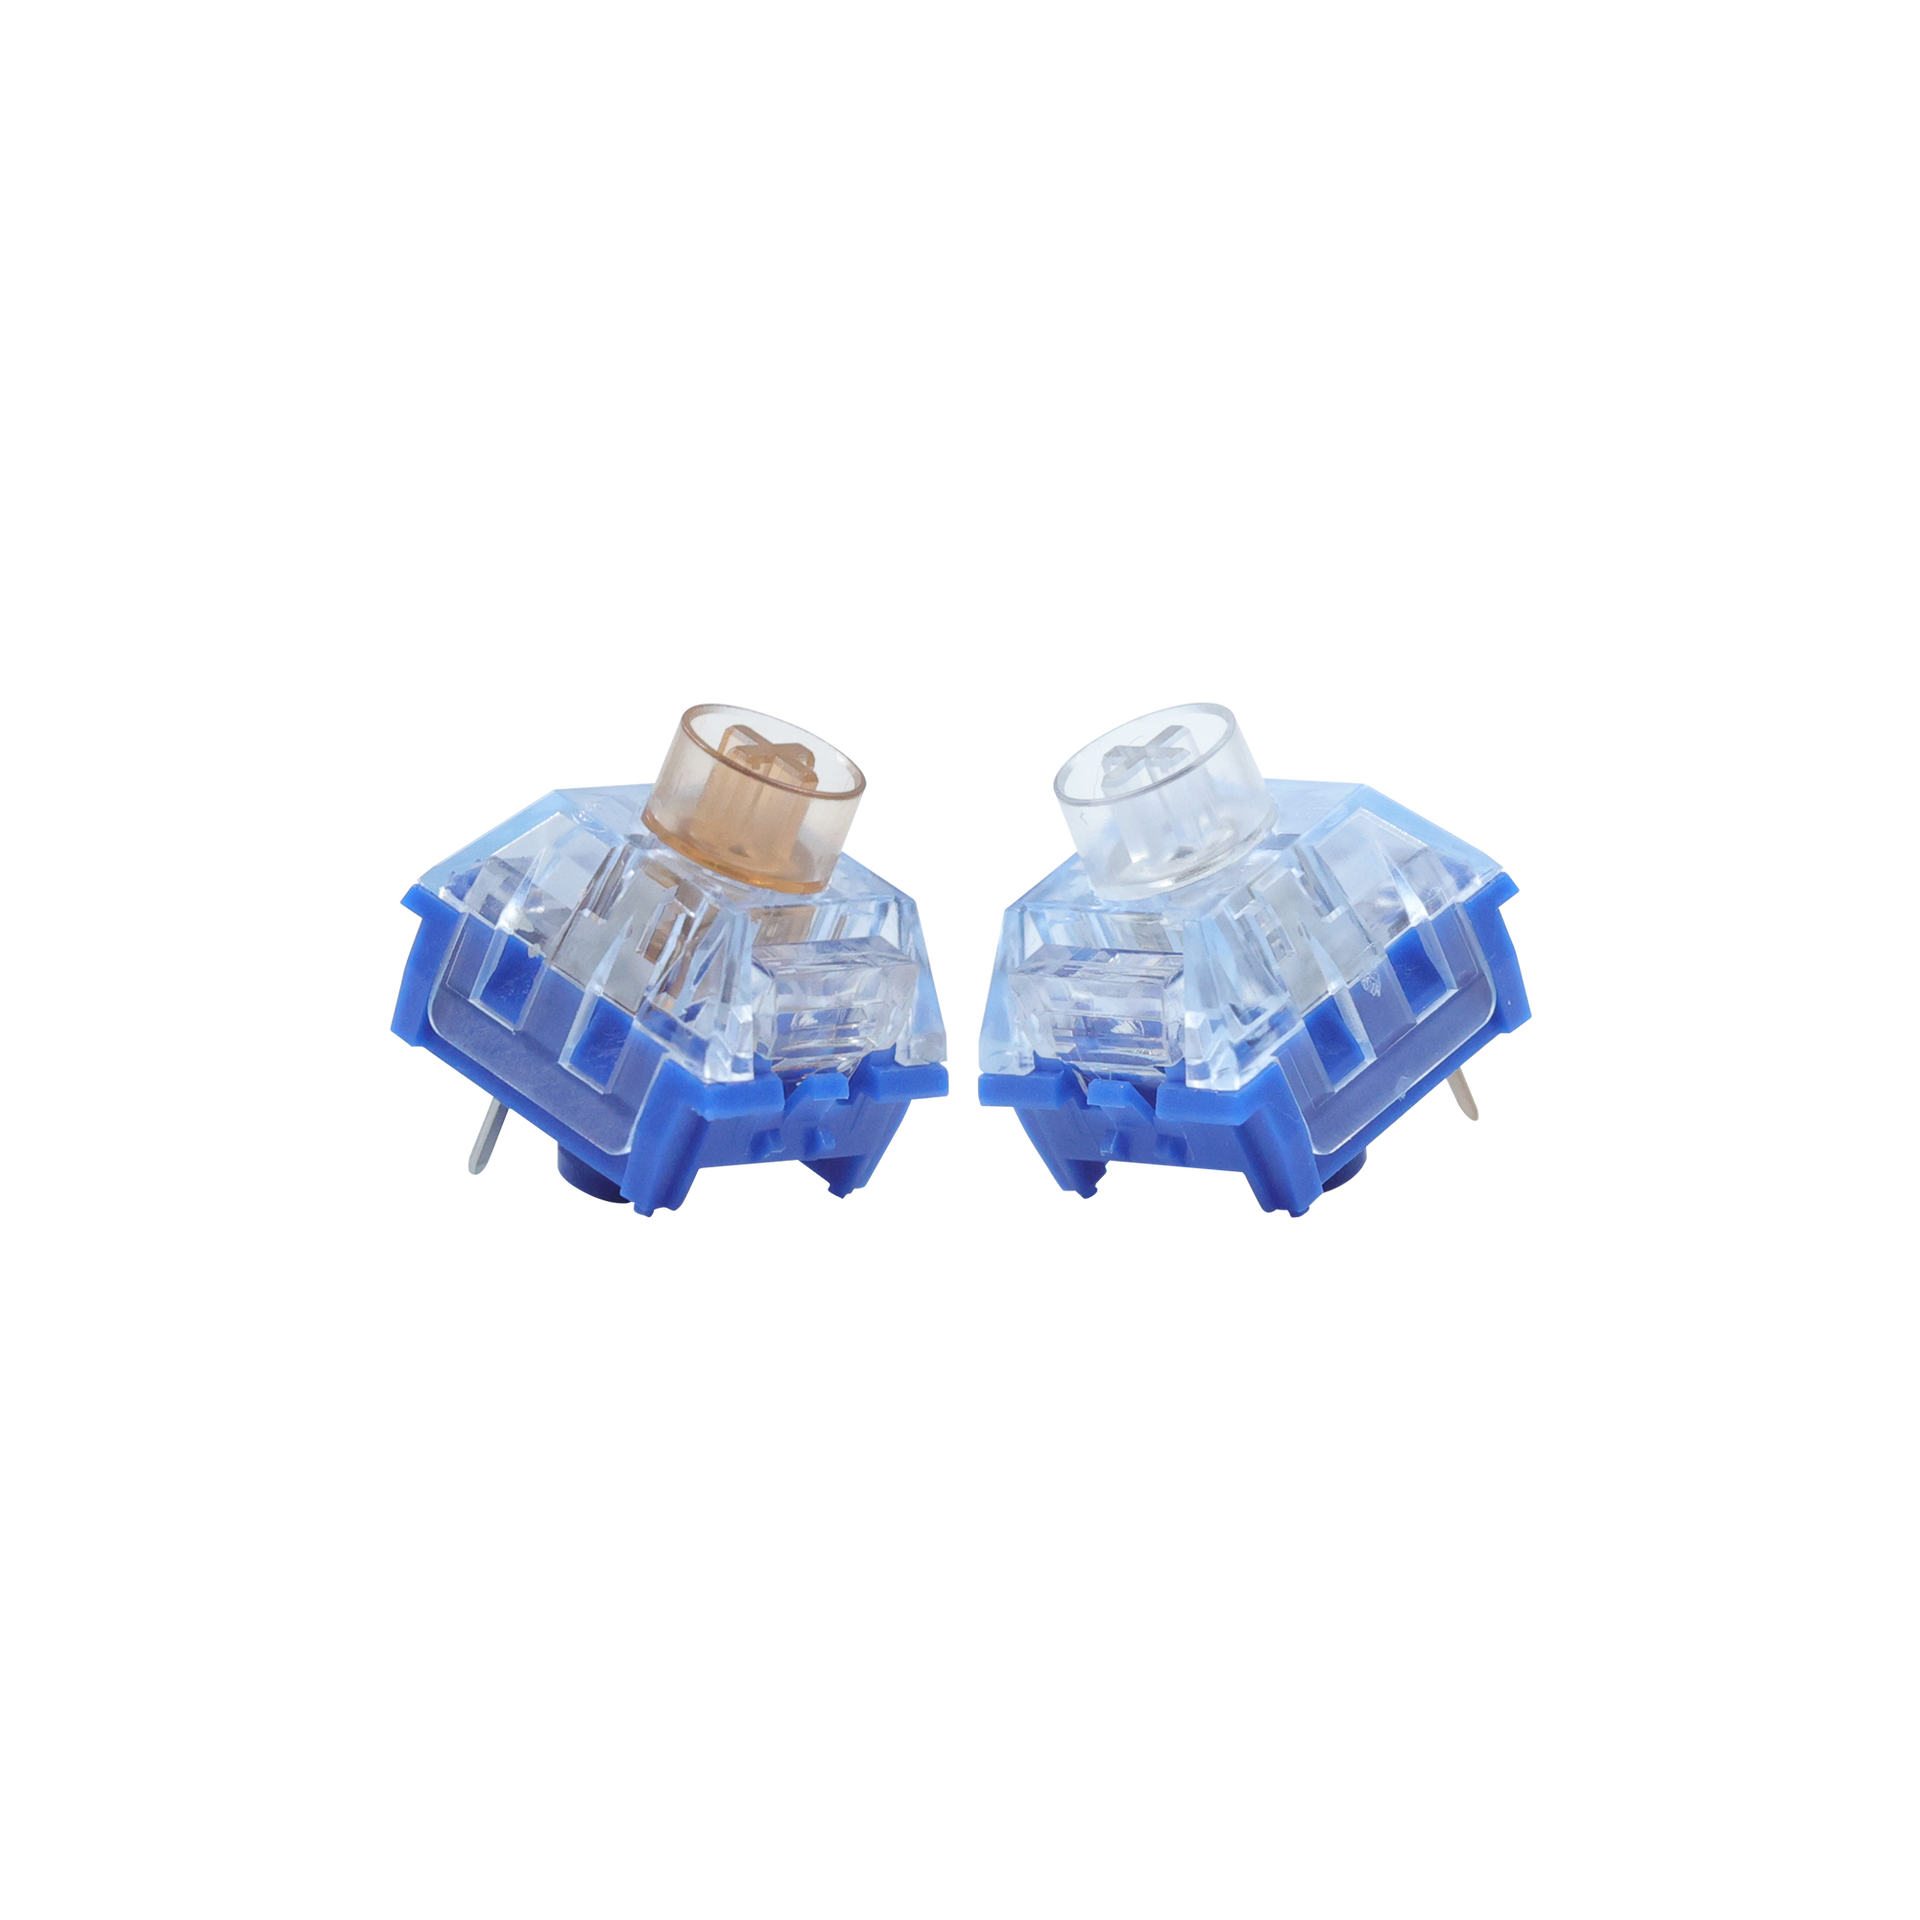 Kailh Deep Sea Silent Pro Box Switch - Whale/Islet-Chosfox